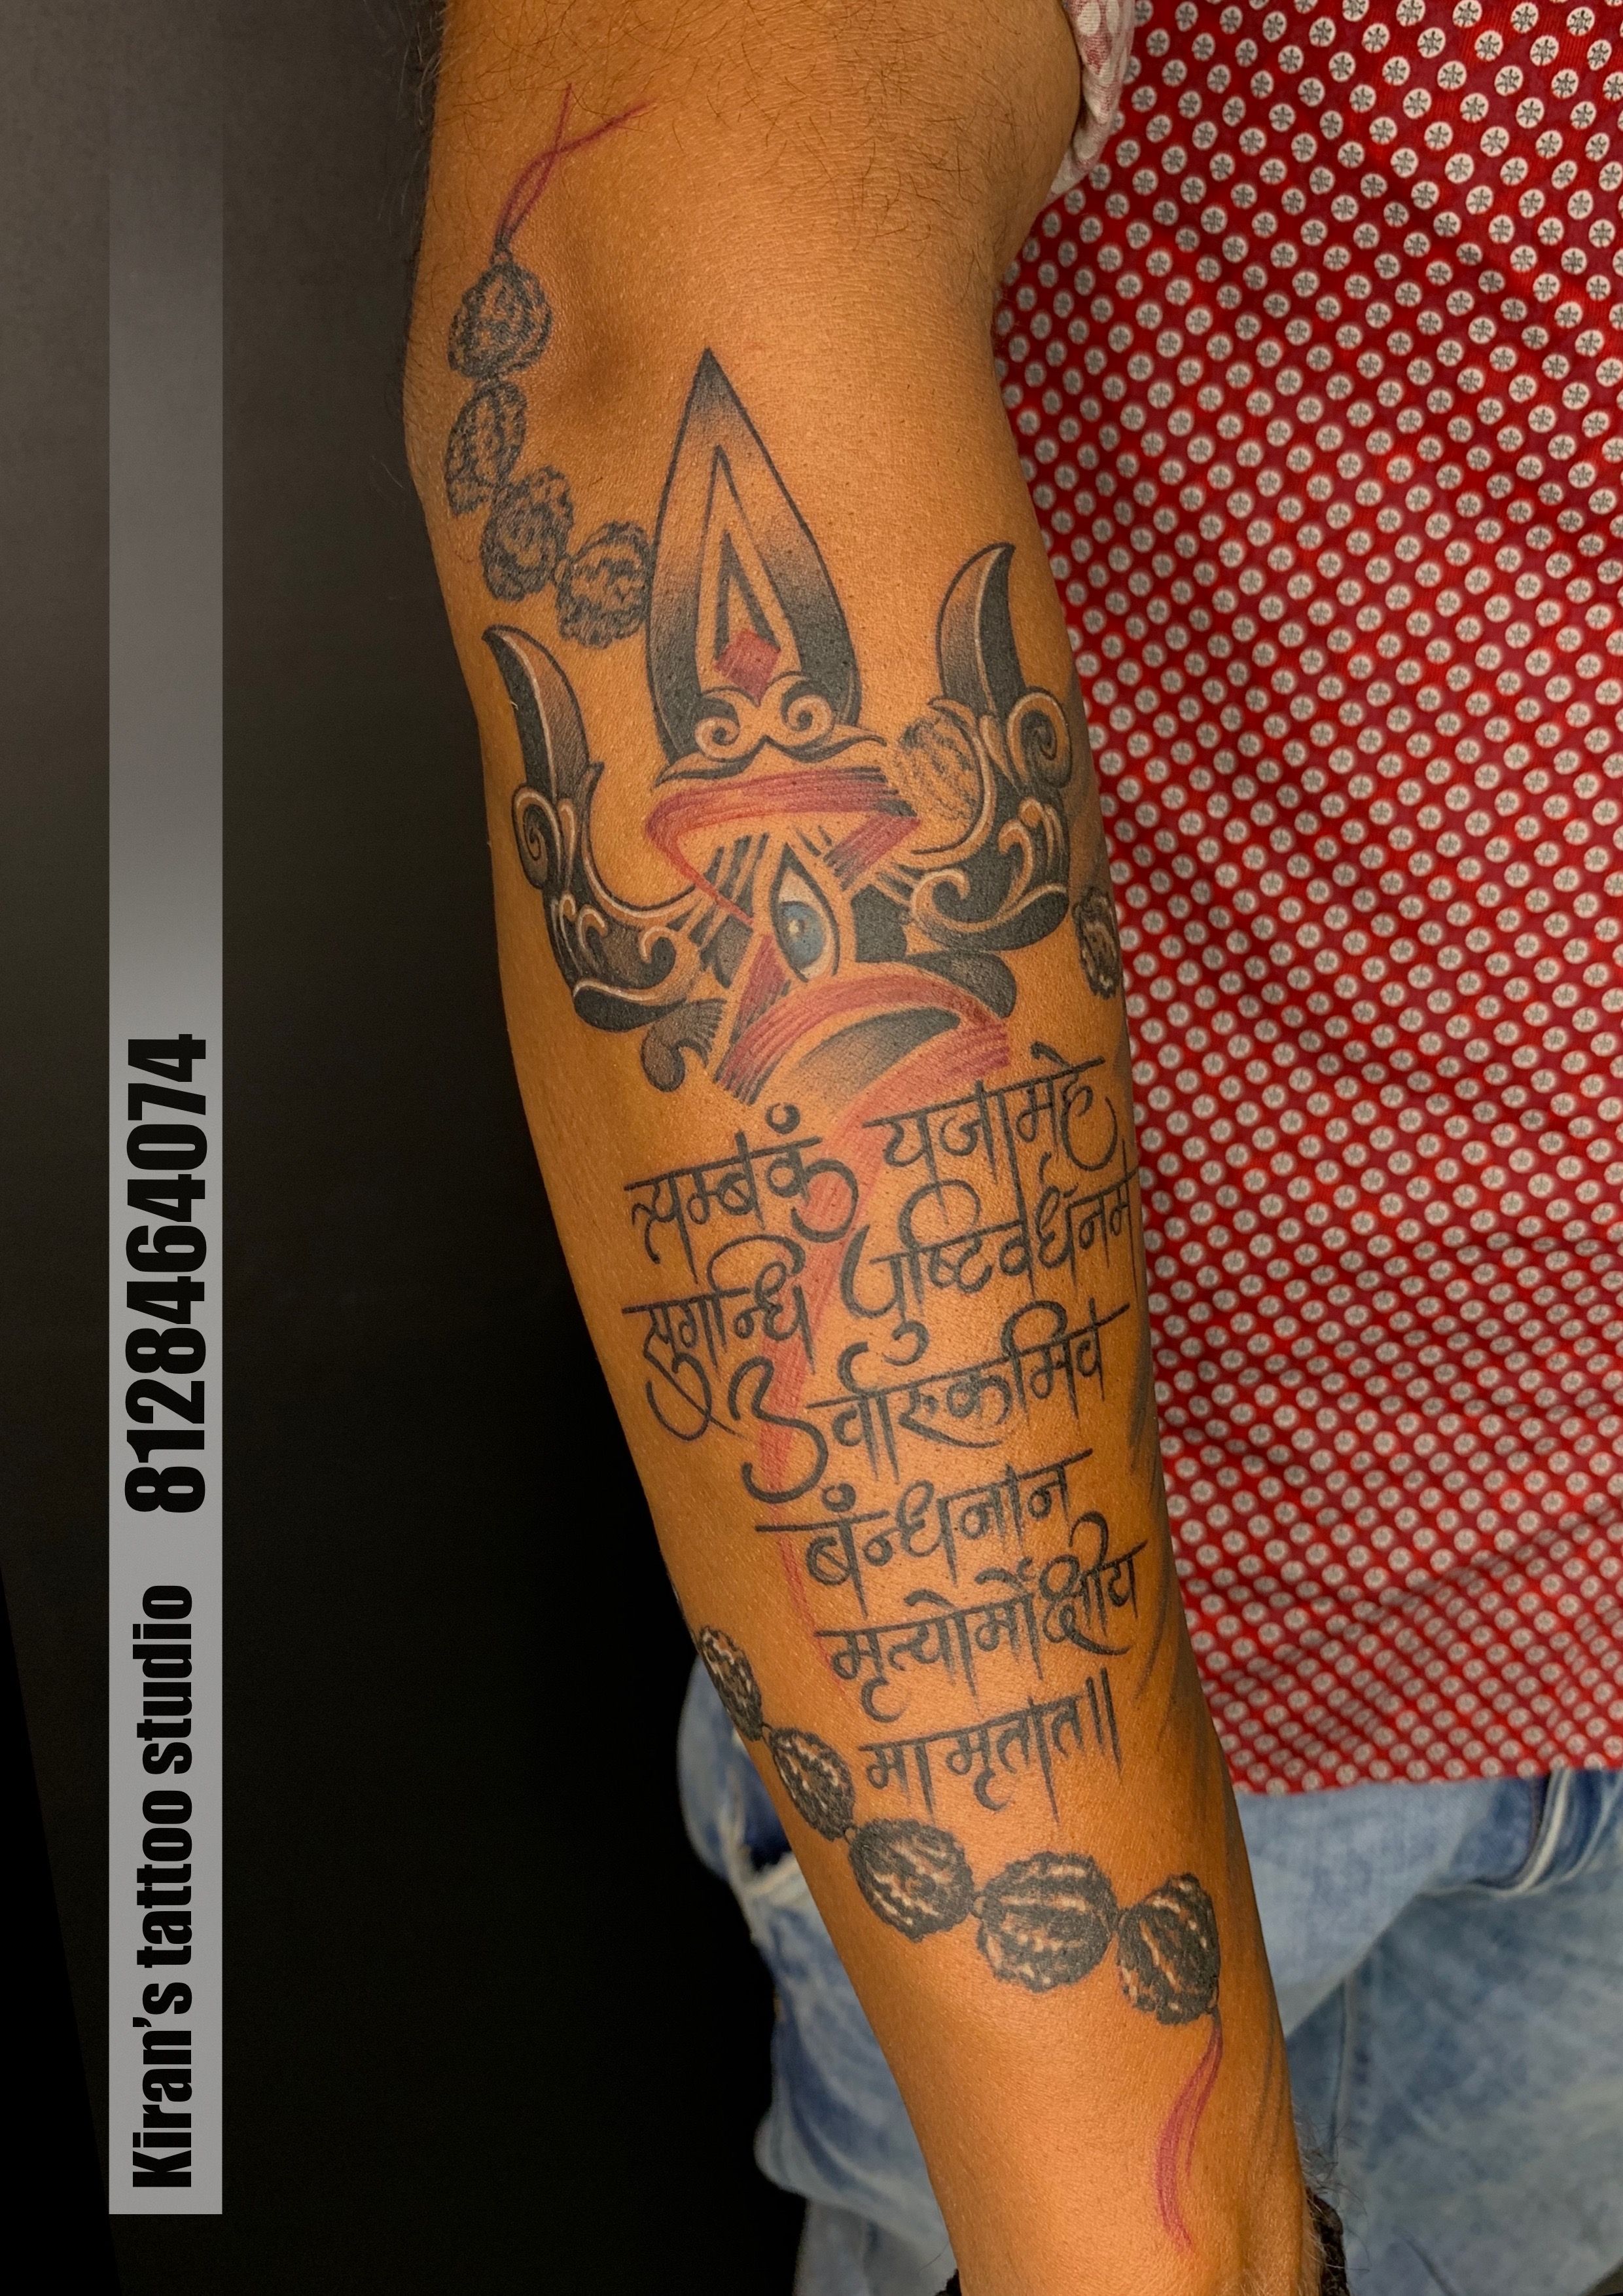 B Tattoo Shop on Tumblr: Trash Style Mrityunjaya Mantra Tattoo by Allan  Gois at Aliens Tattoo India. Completely out-of-the-box, isn't it? Client  had a...